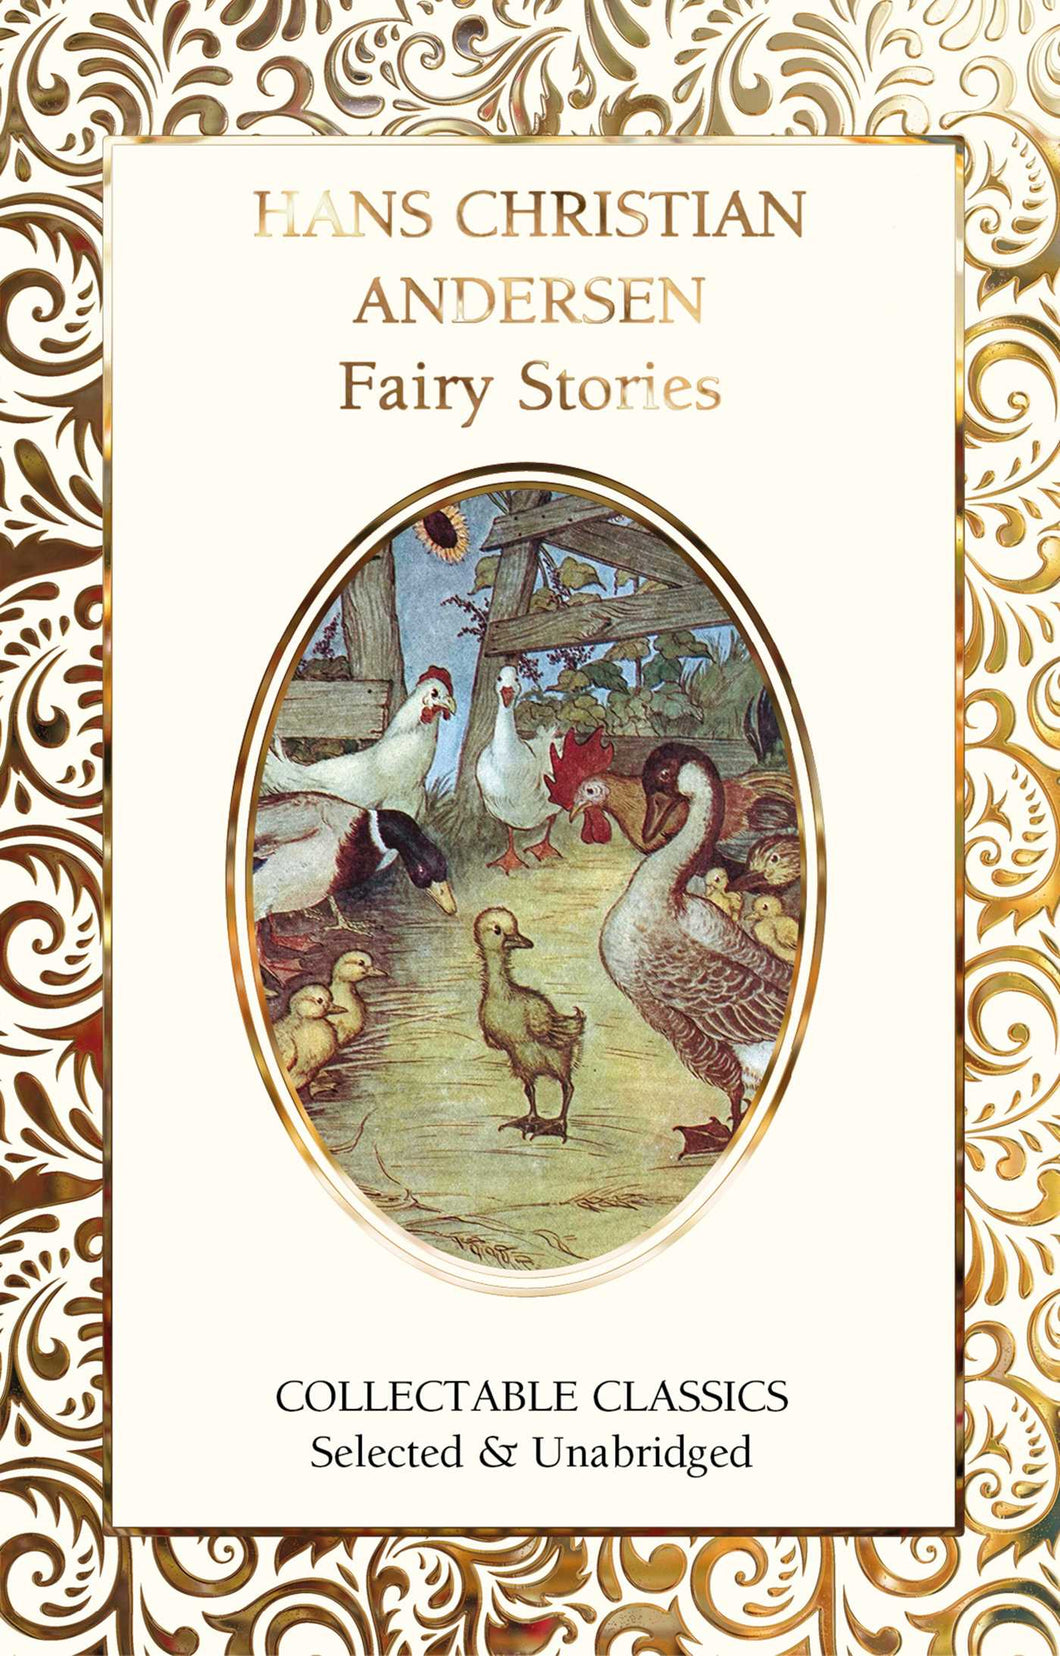 Hans Christian Andersen Fairy Tales Collectable Classics